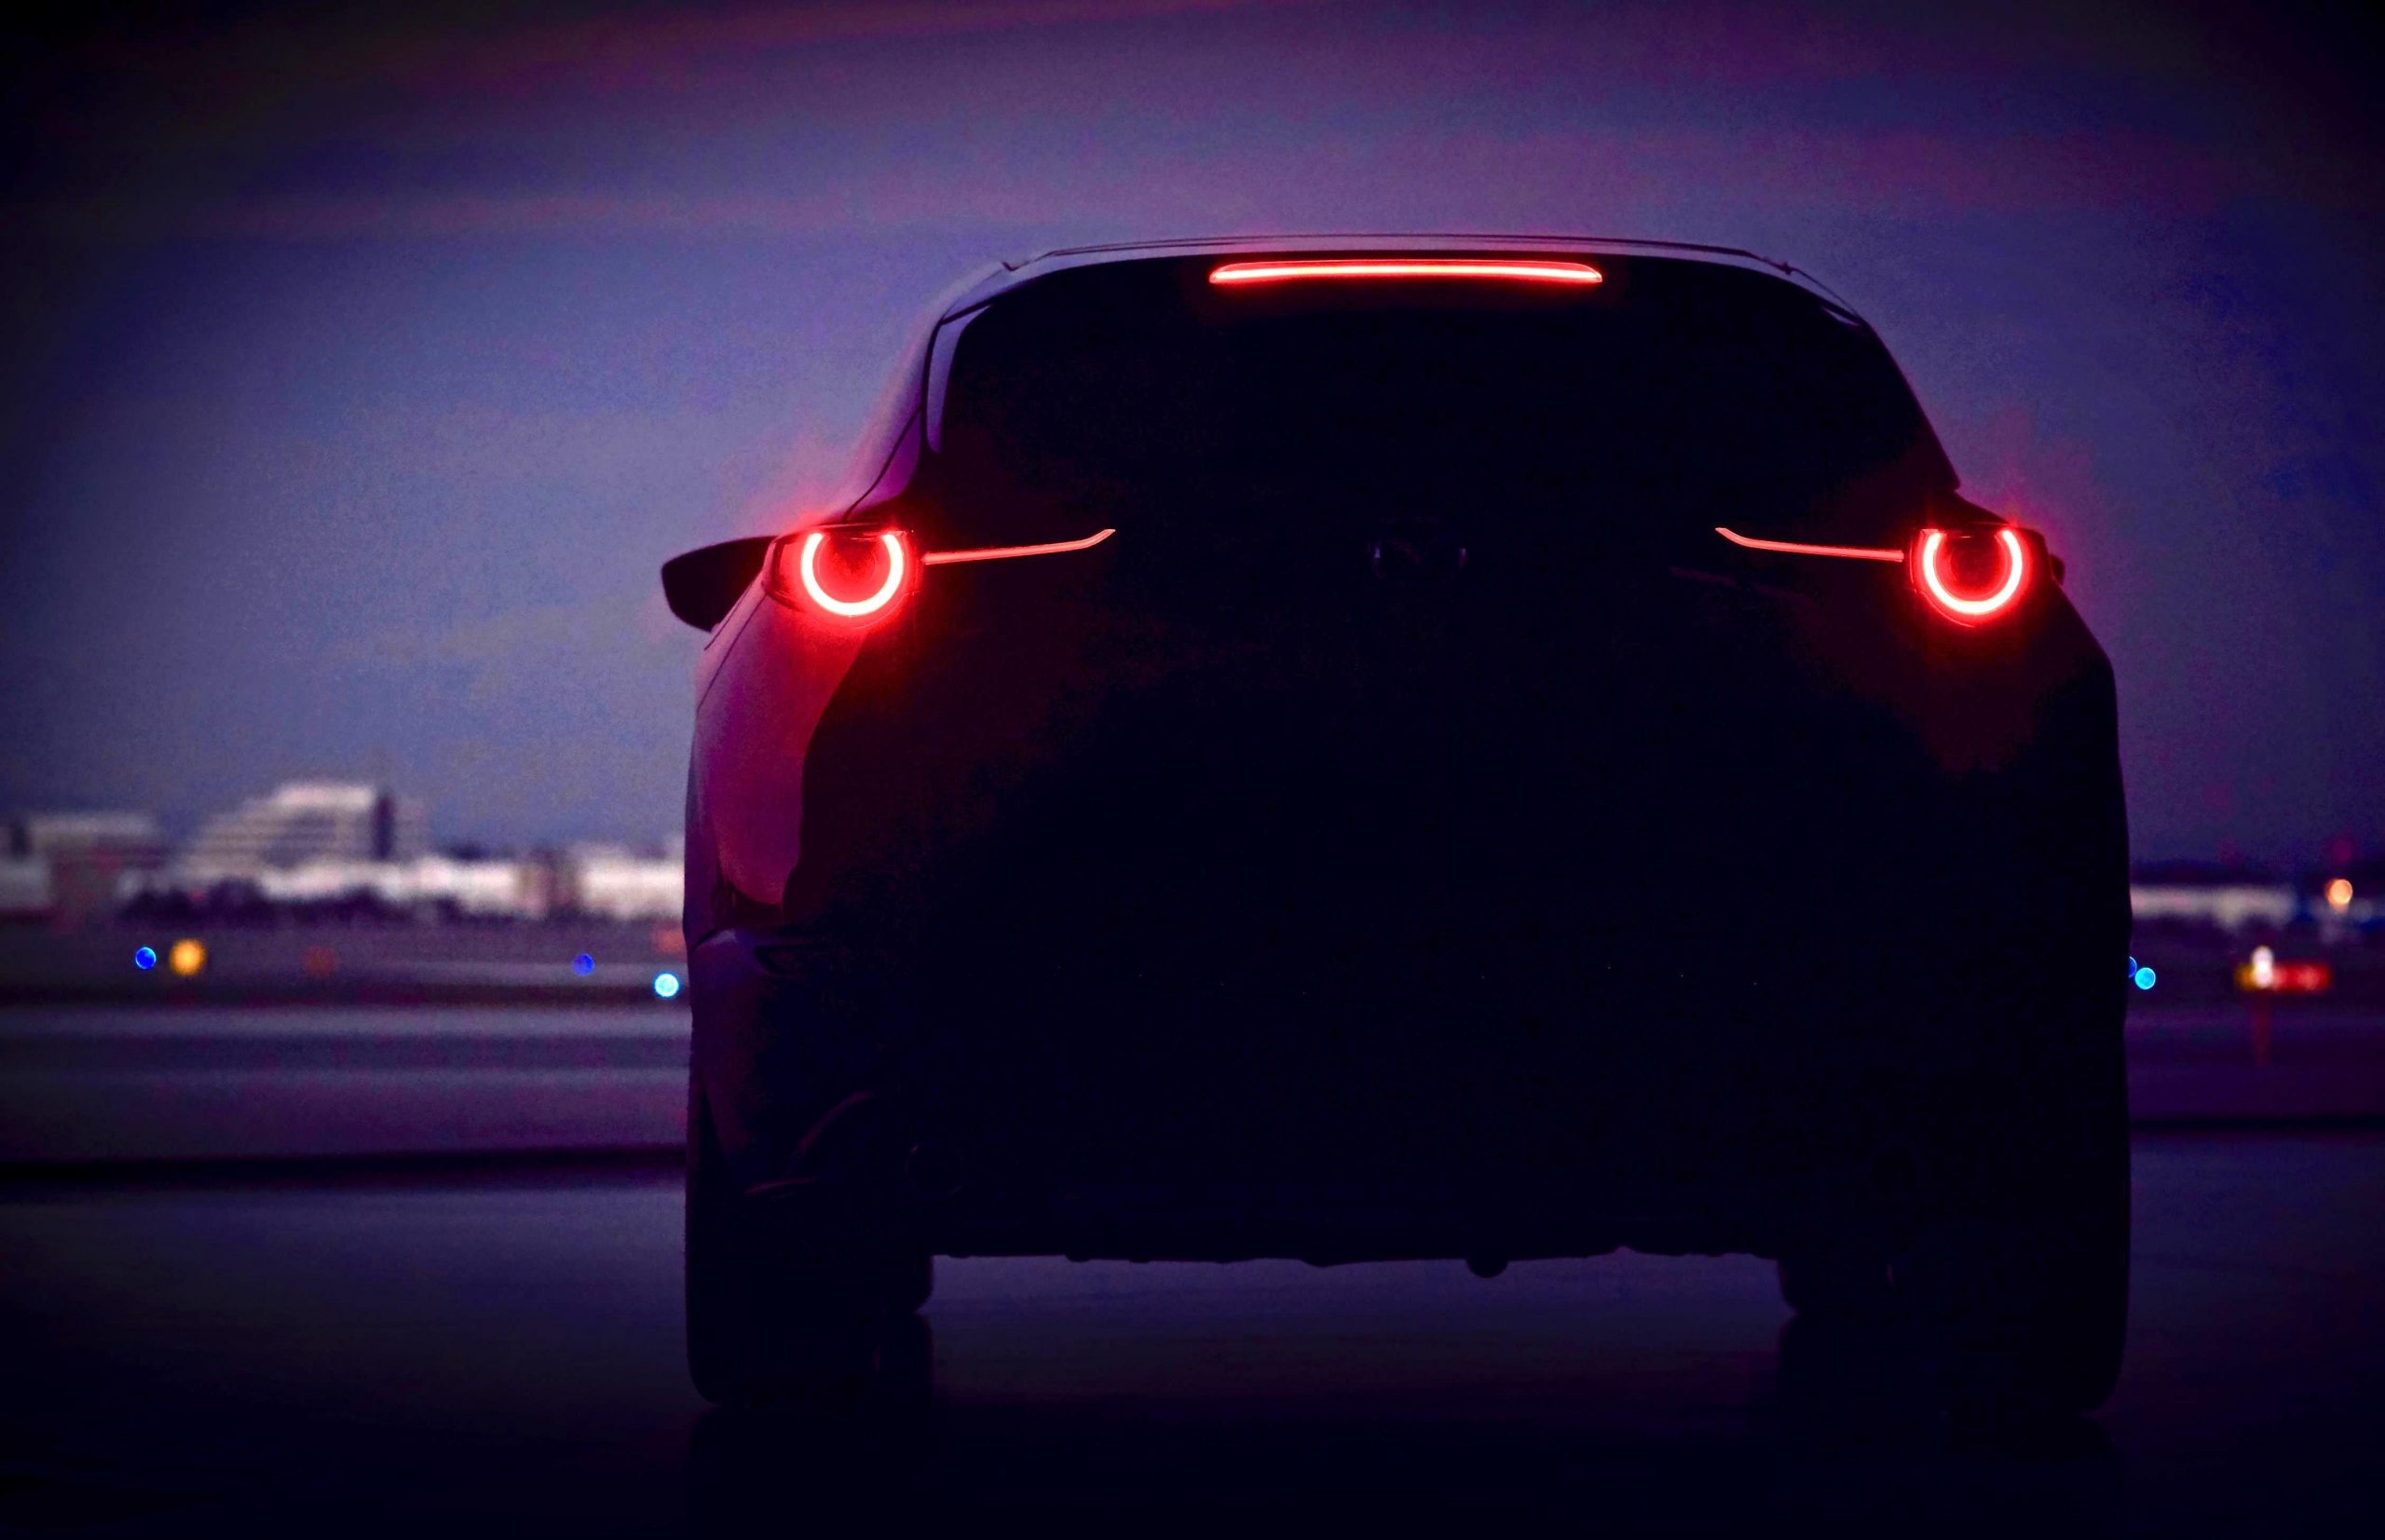 All-new Mazda SUV previewed, new CX-3 or CX-6?